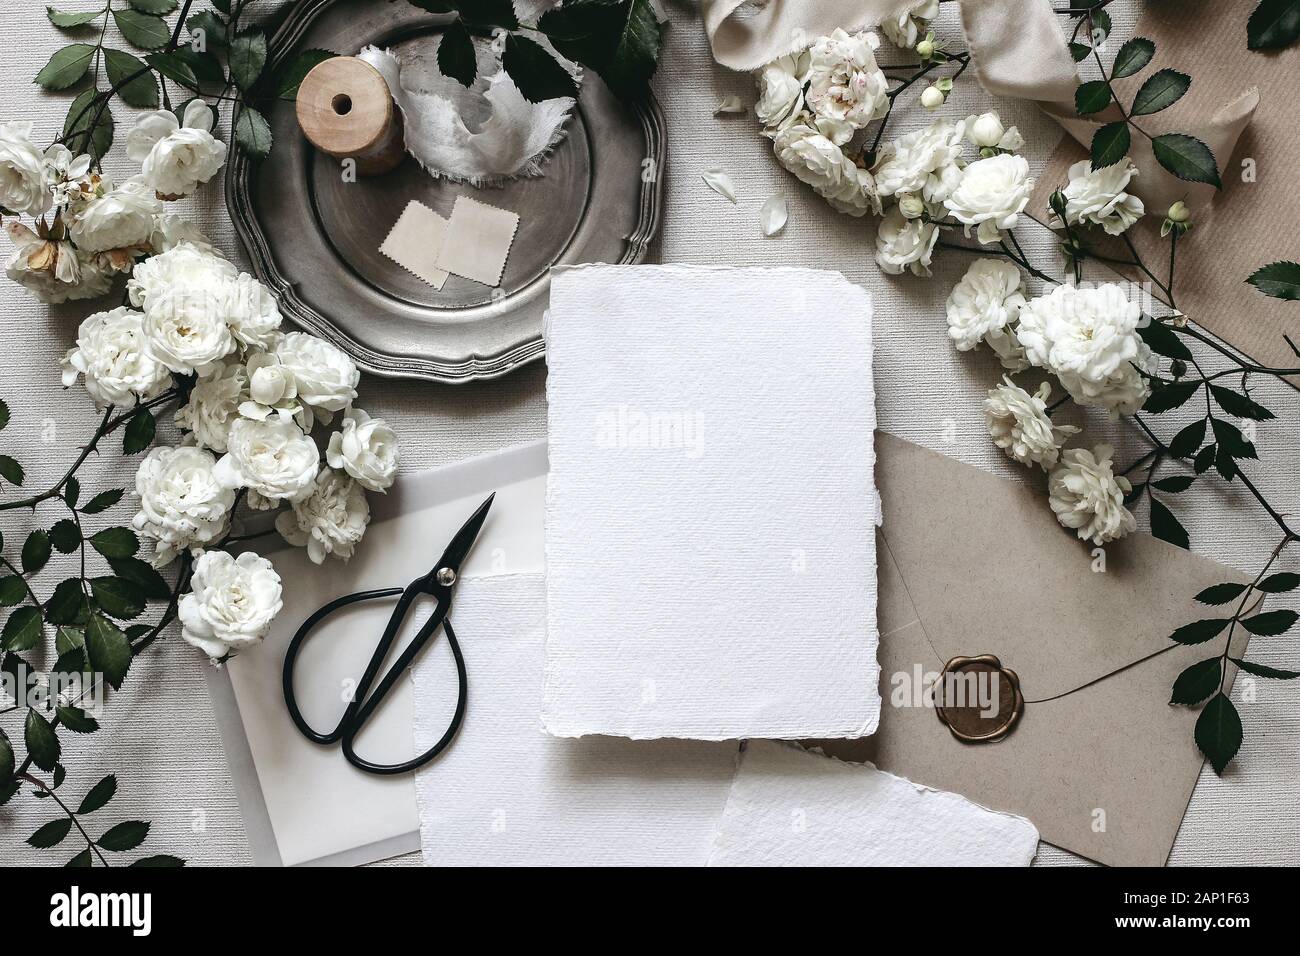 Download Moody Wedding Table Mockup Scene Stationery Composition With Fading White Rose Flowers Silver Plate Black Scissors Envelopes And Blank Greeting Ca Stock Photo Alamy